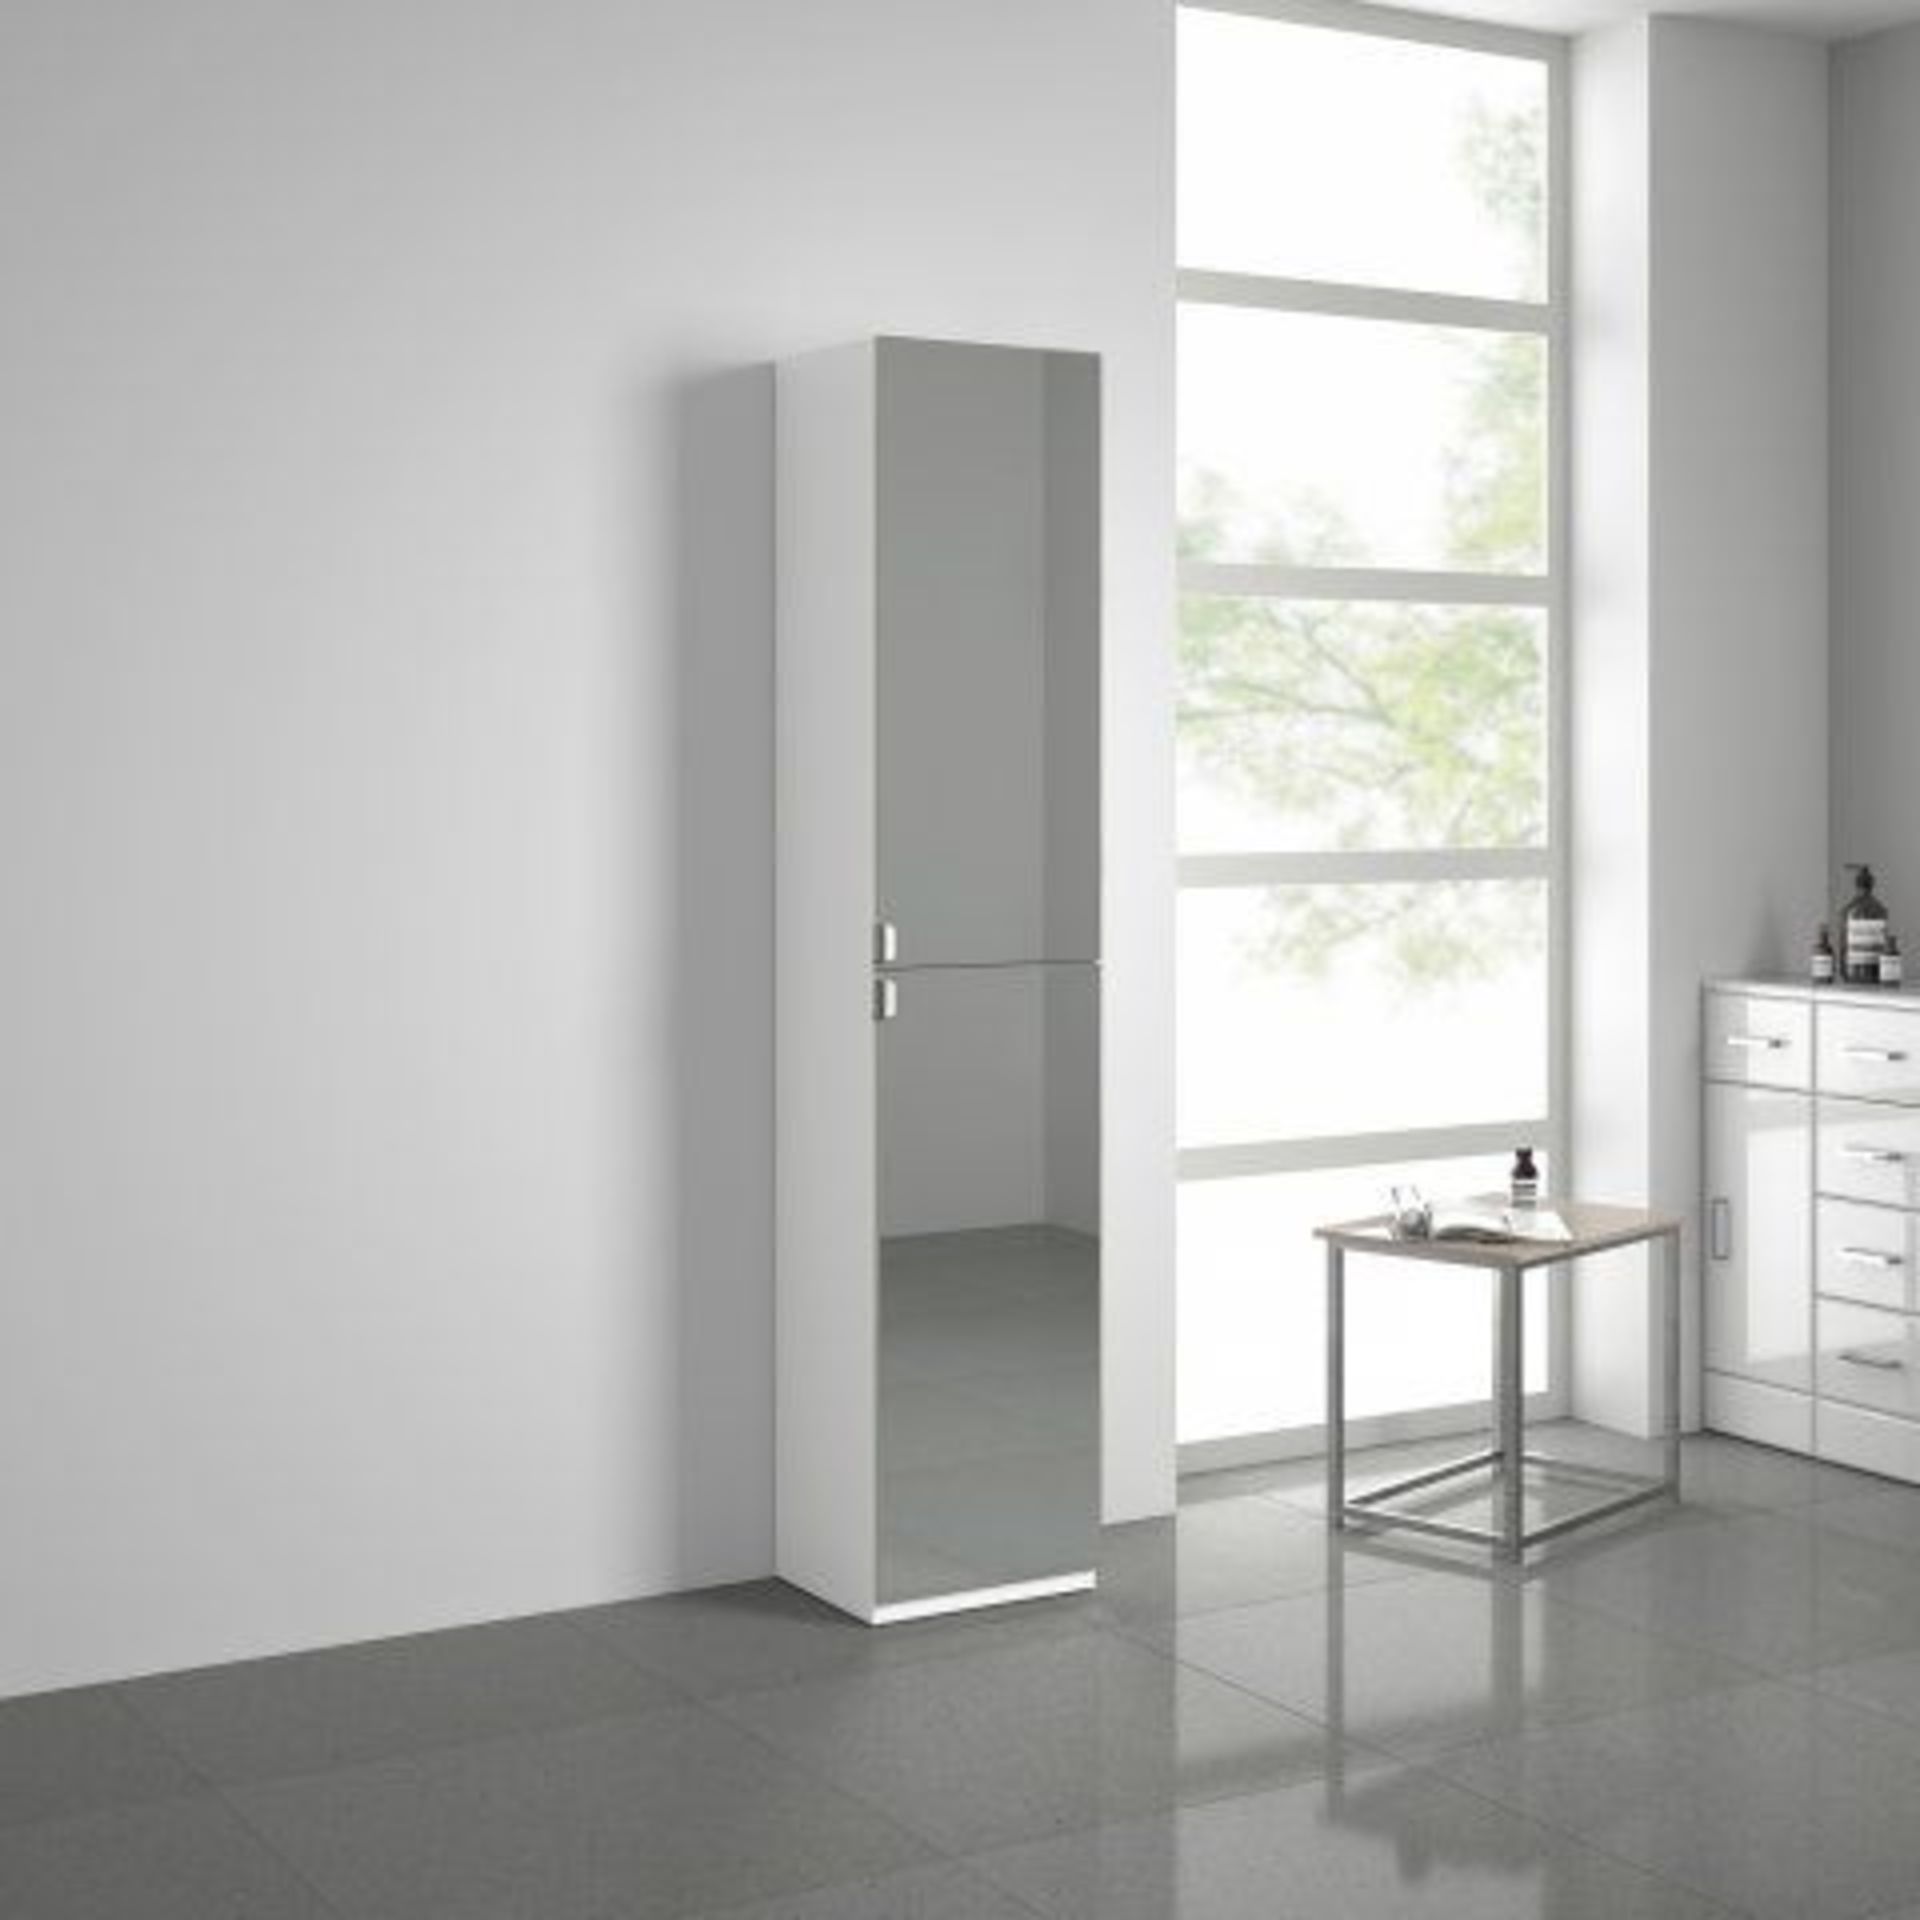 New & Boxed Matte White Mirrored Door Tall Cabinet. Mc153 RRP £424.99. Enjoy The Benefits Of A...